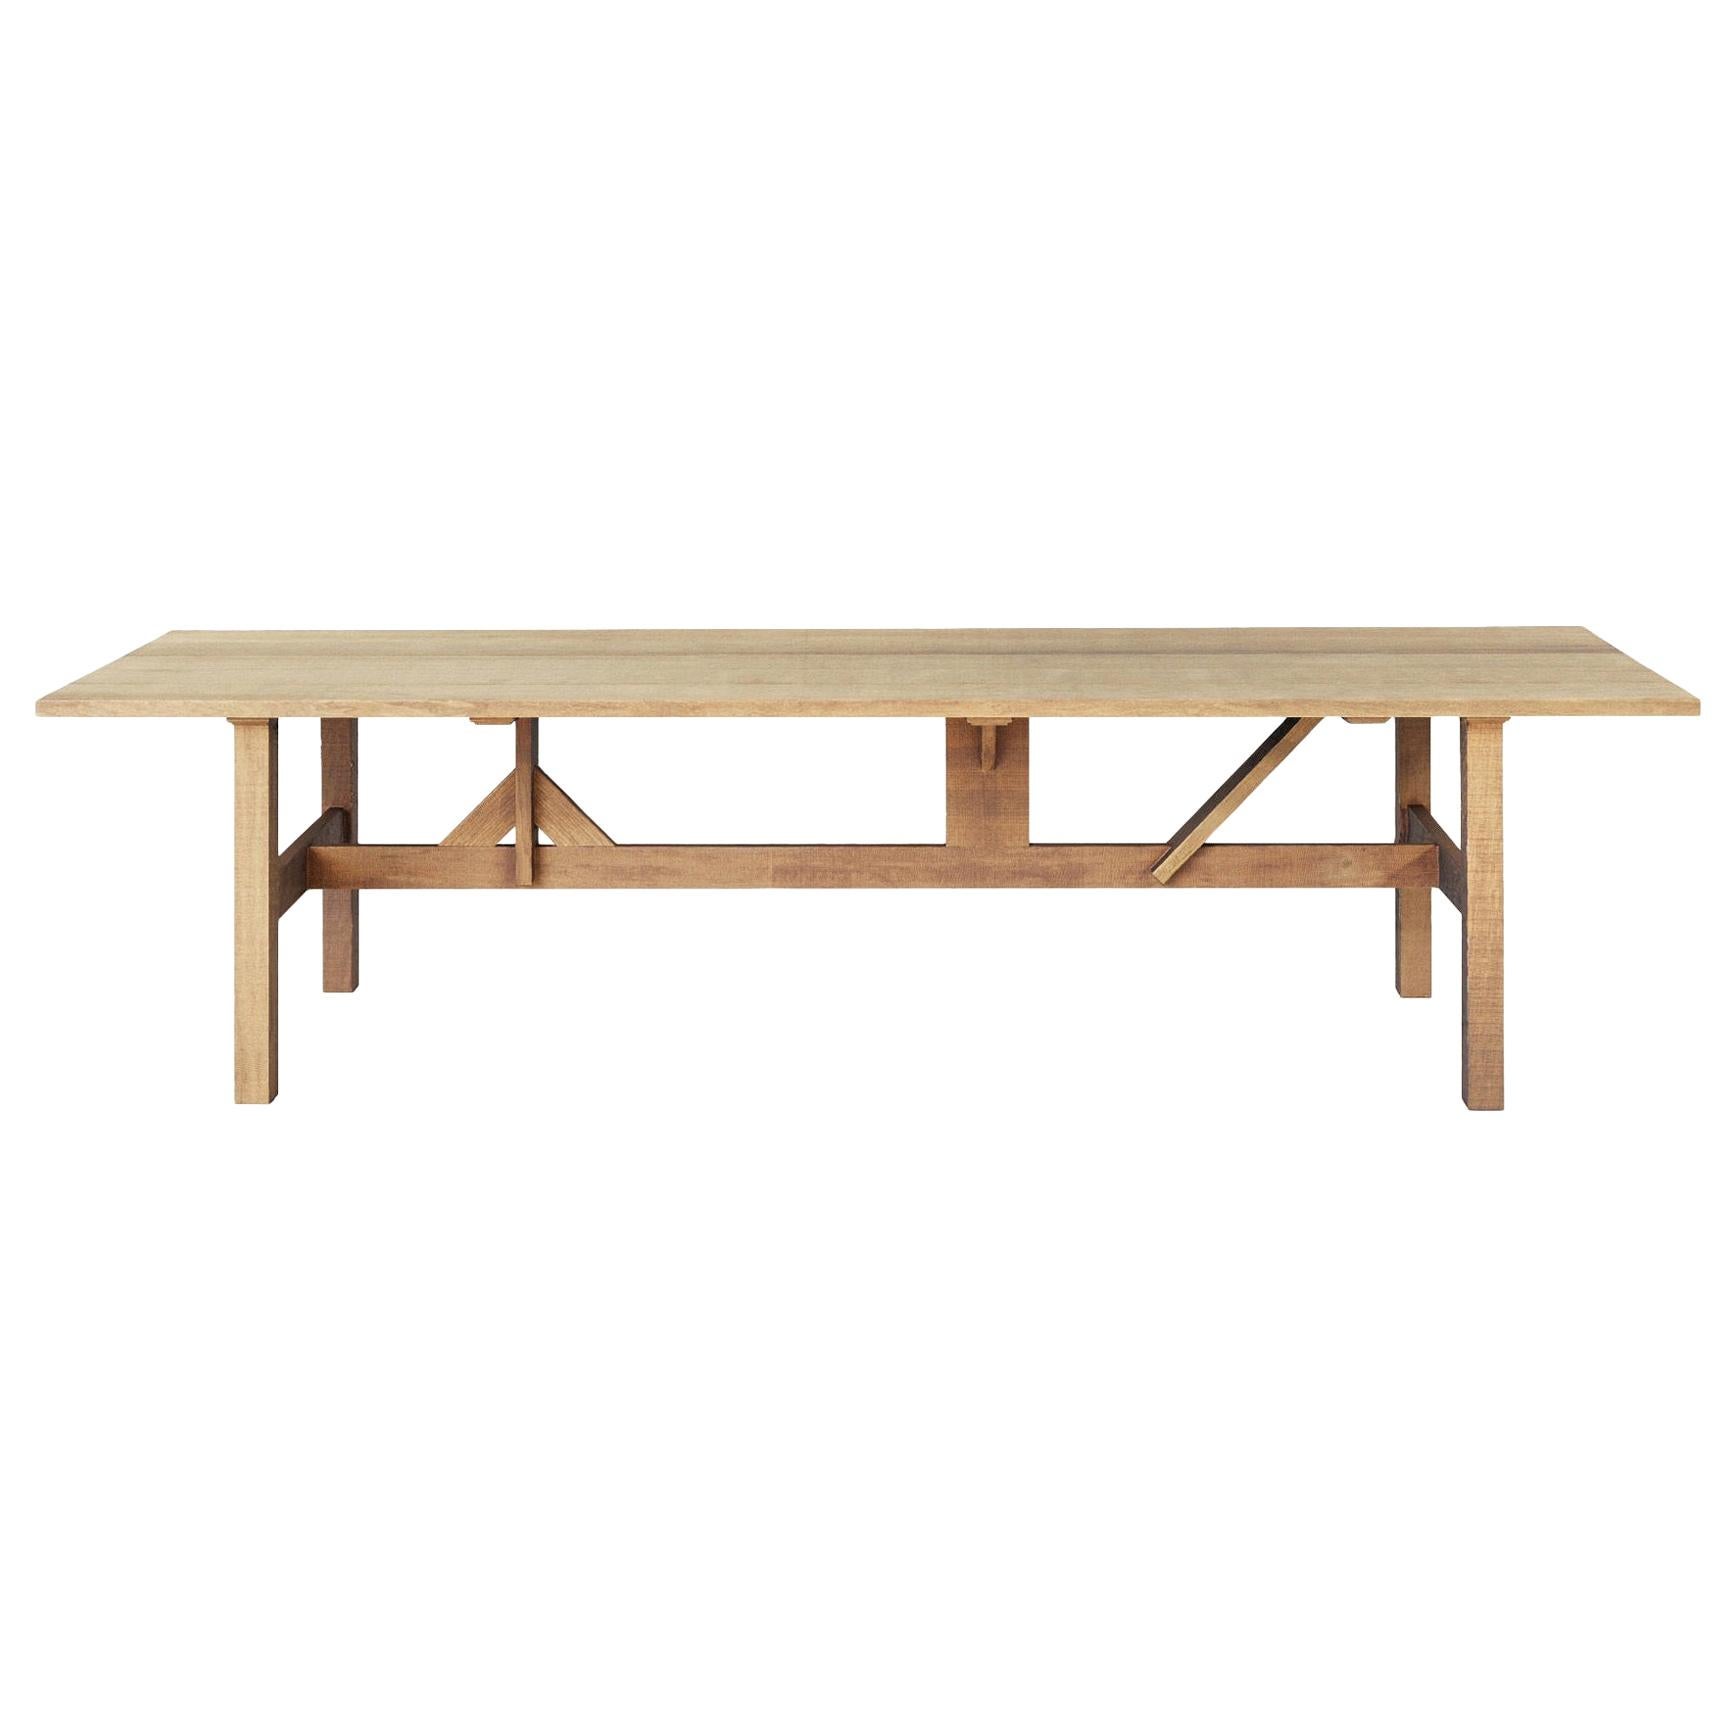 7' - 2" Handcrafted Dining Table for Indoors/Outdoors. For Sale